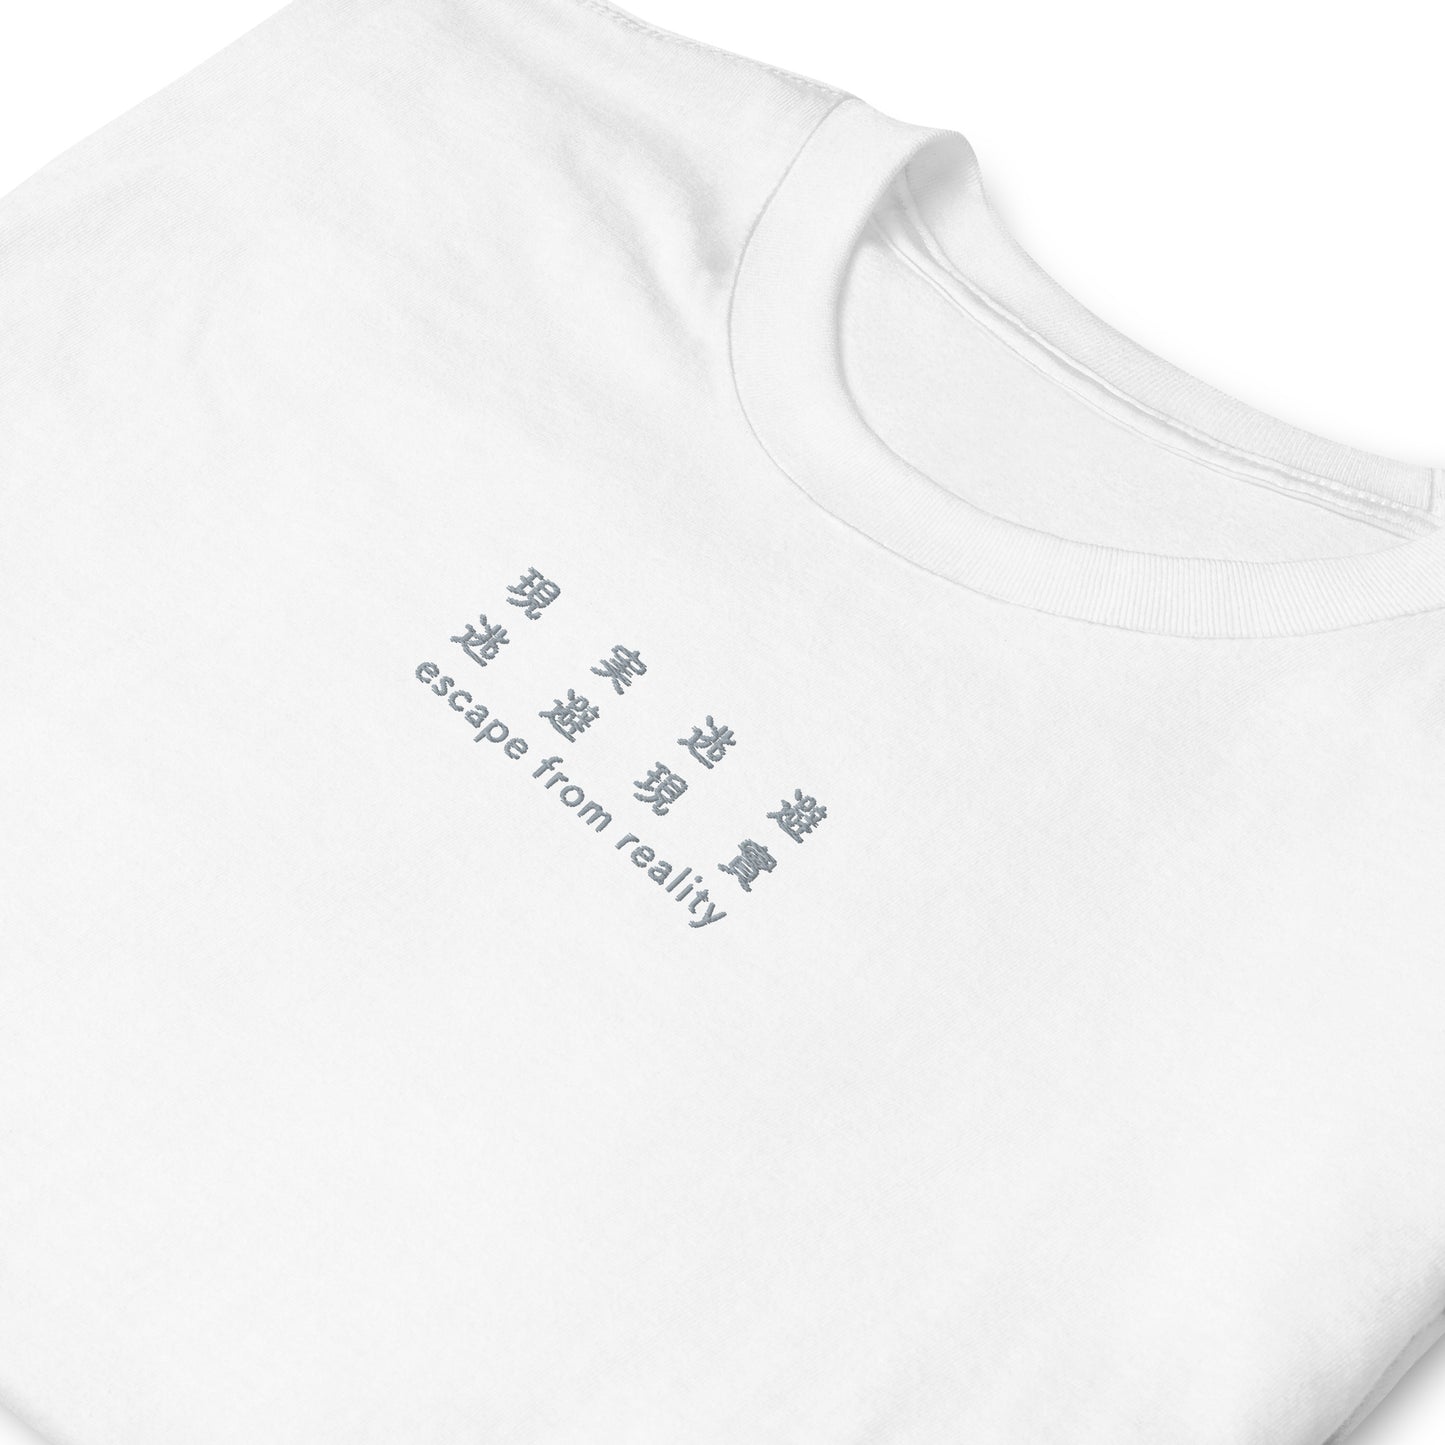 White High Quality Tee - Front Design with an Light Gray Embroidery "Escape From Reality" in Japanese,Chinese and English